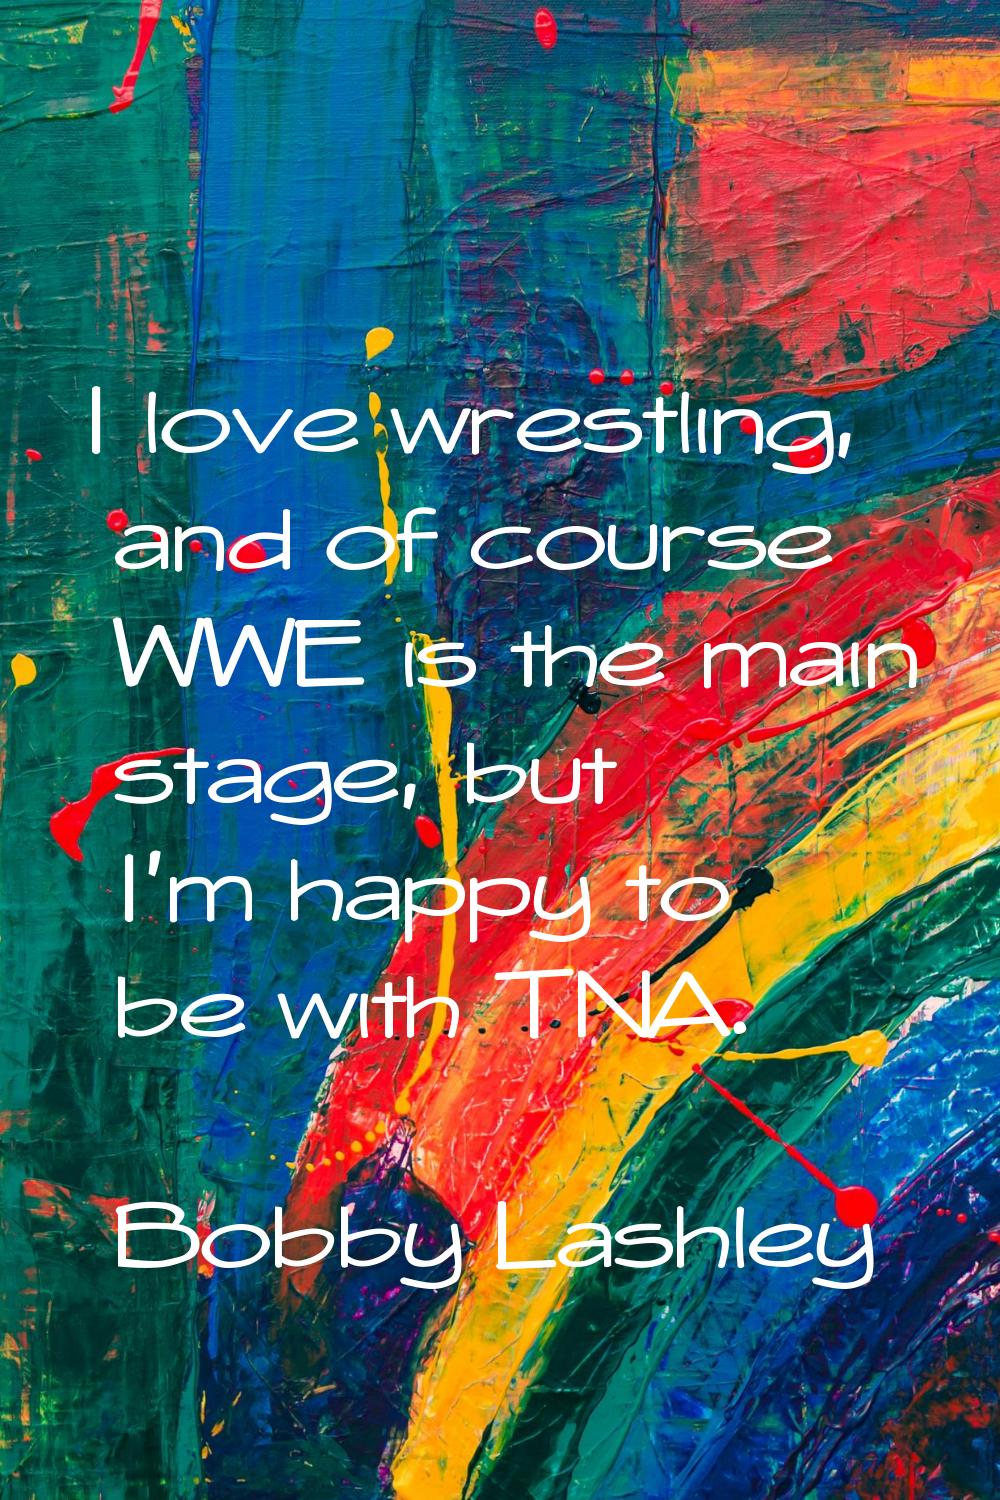 I love wrestling, and of course WWE is the main stage, but I'm happy to be with TNA.